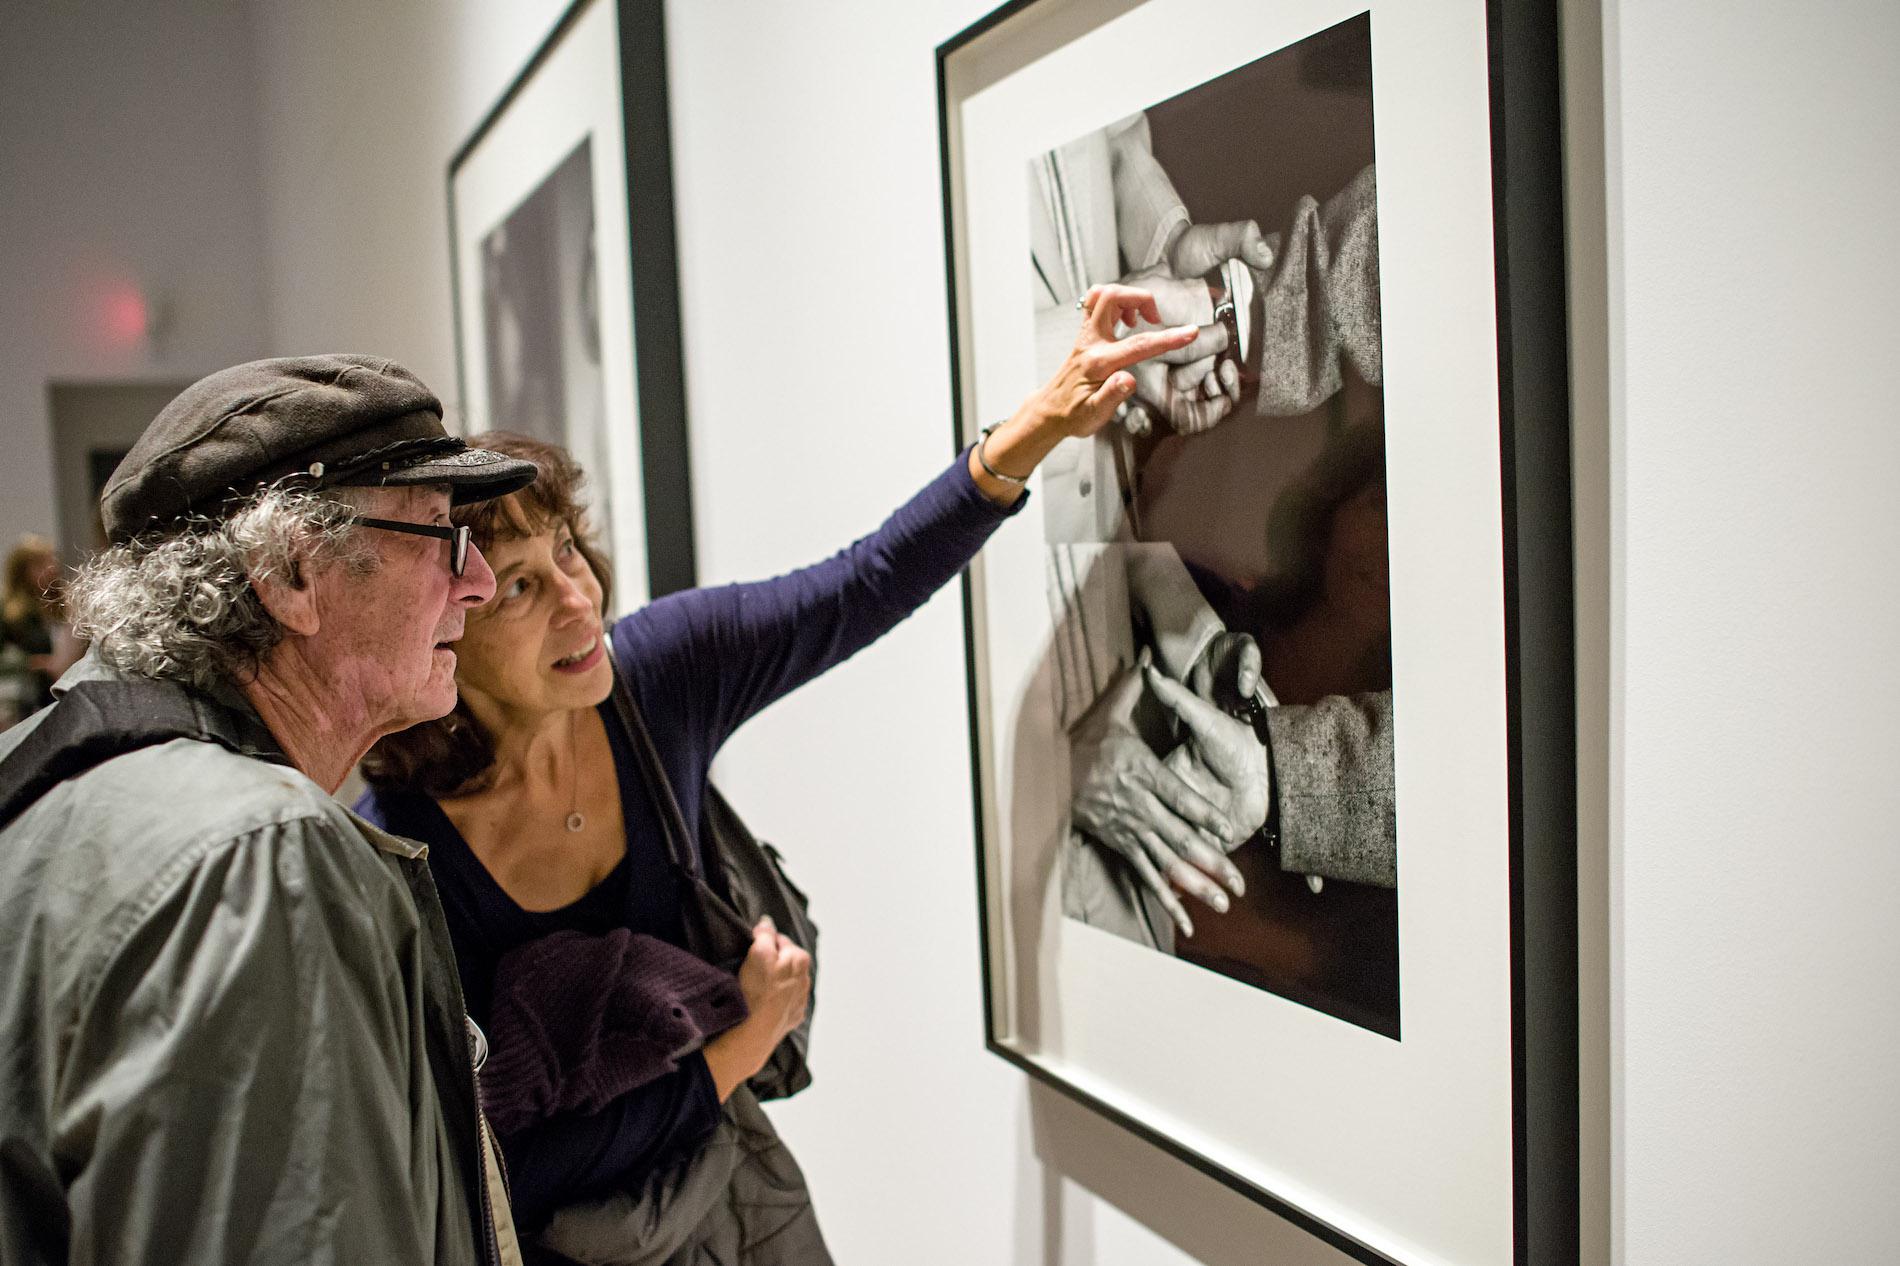 A man and woman examine a black and white photograph. The woman points at the top of the photograph.